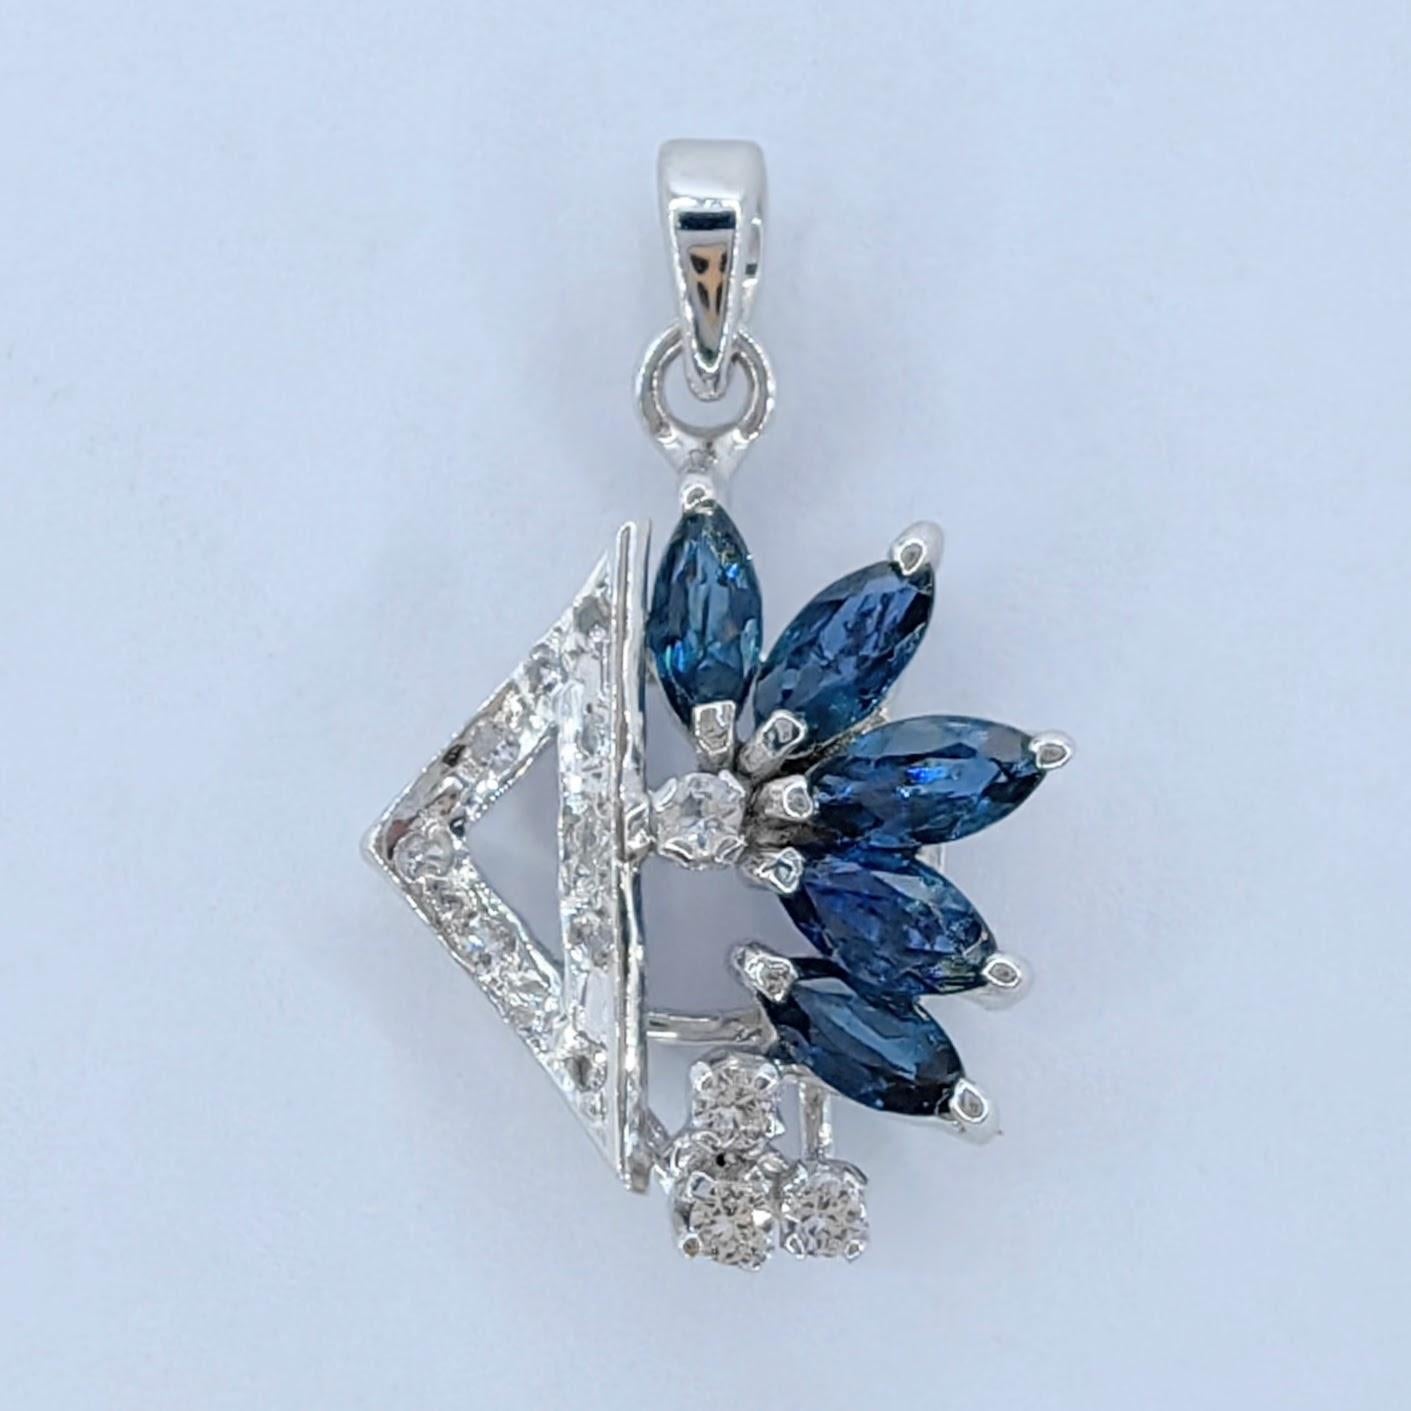 Introducing our exquisite Vintage Art Deco-inspired Marquise Blue Sapphire Diamond Necklace Pendant, a captivating and sophisticated piece.

At its heart, five marquise-cut deep blue sapphires create a stunning focal point, elegantly pointing